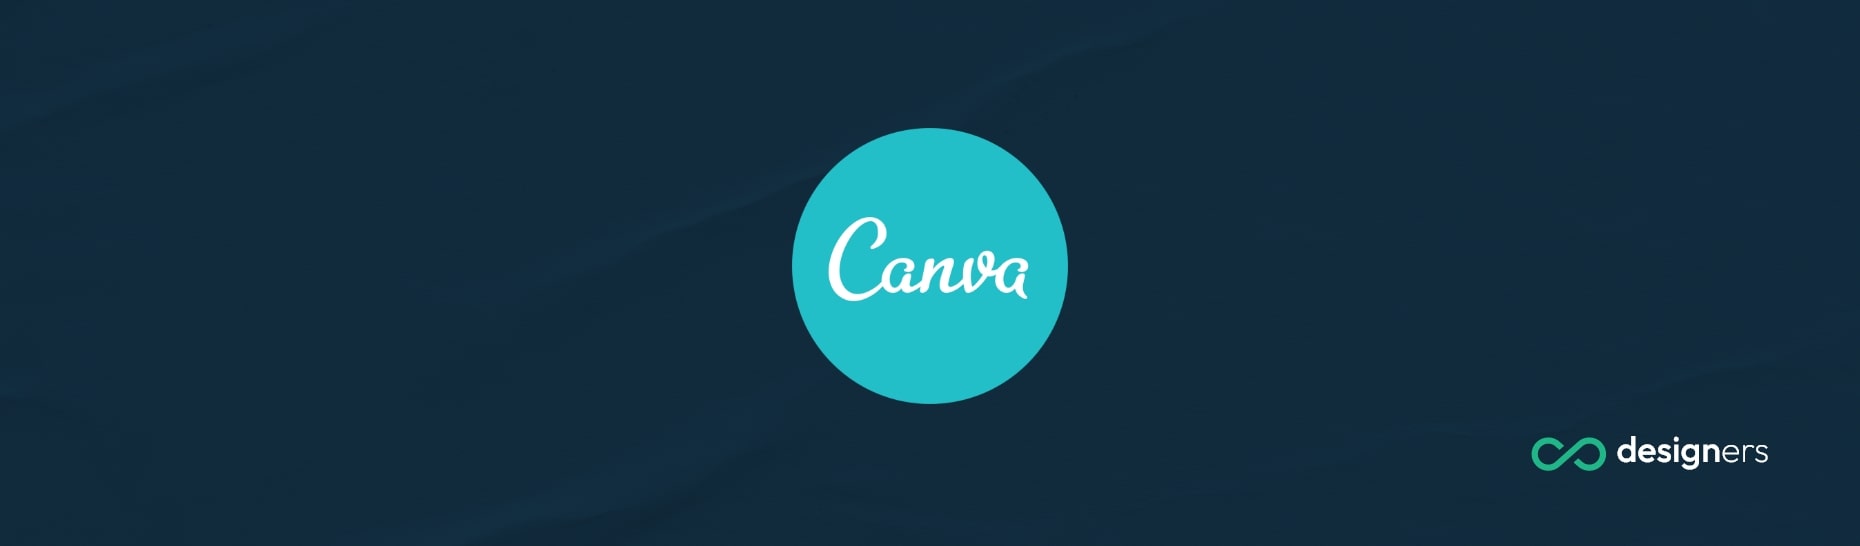 Does Sprout Social Integrate With Canva?